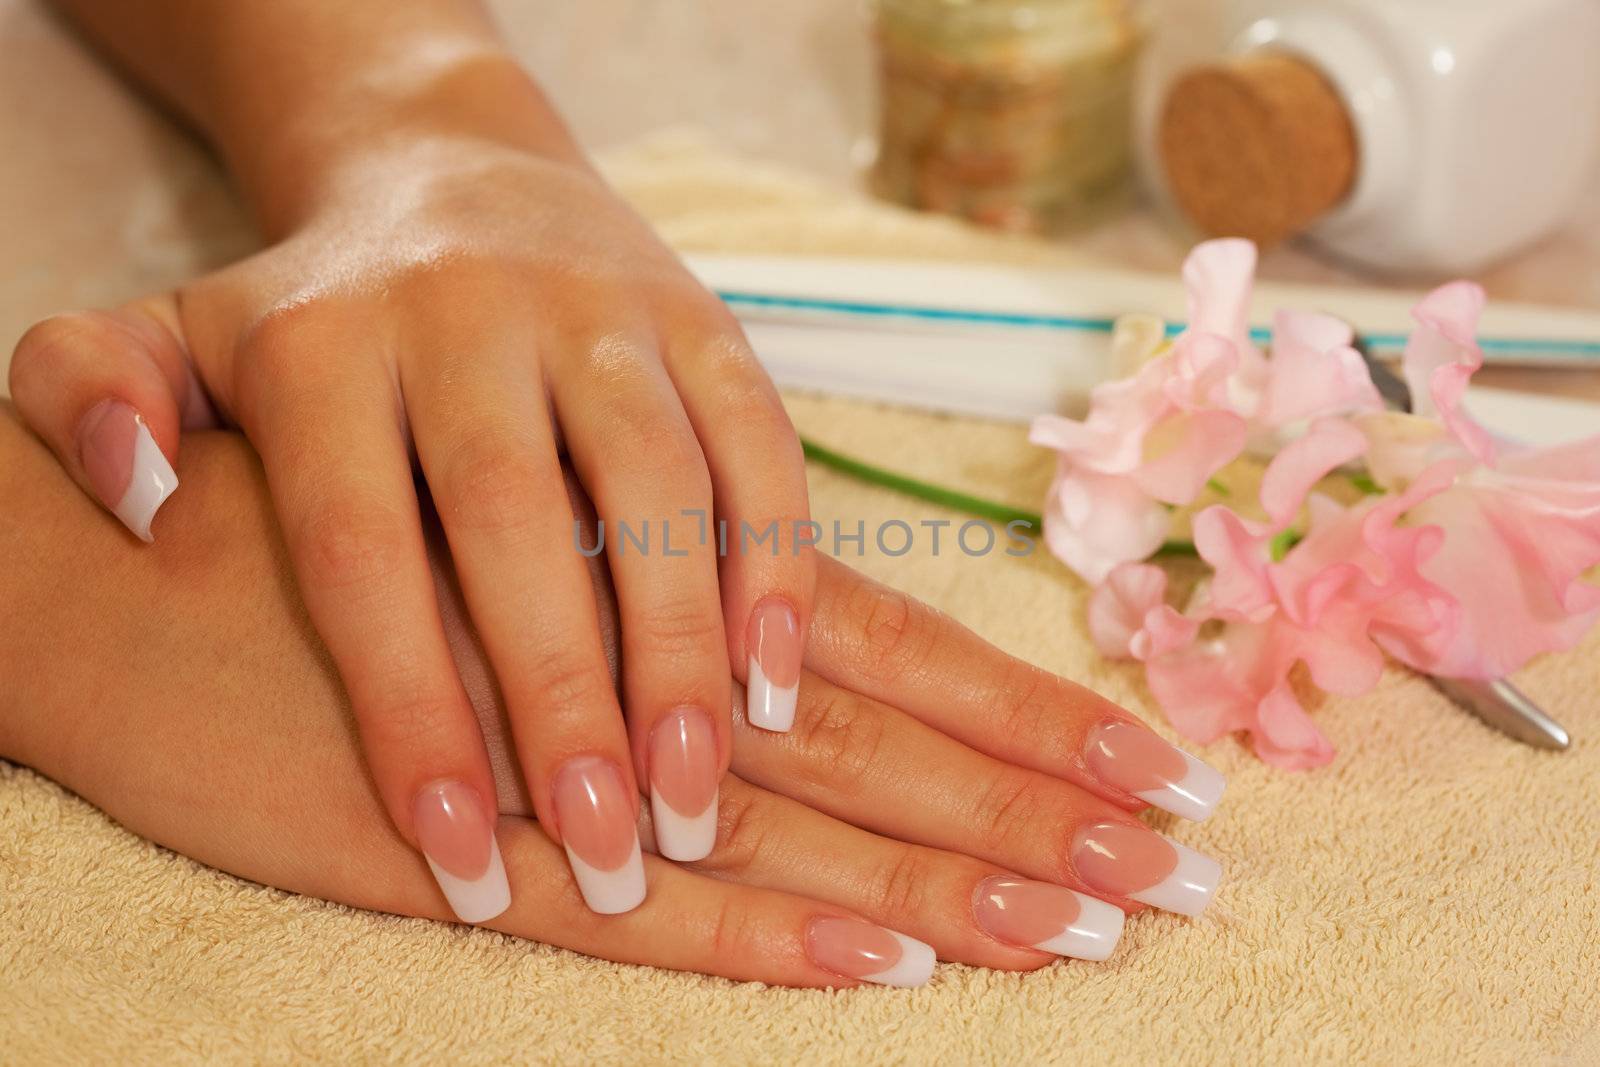 Hands of young woman with french manicure by mihhailov